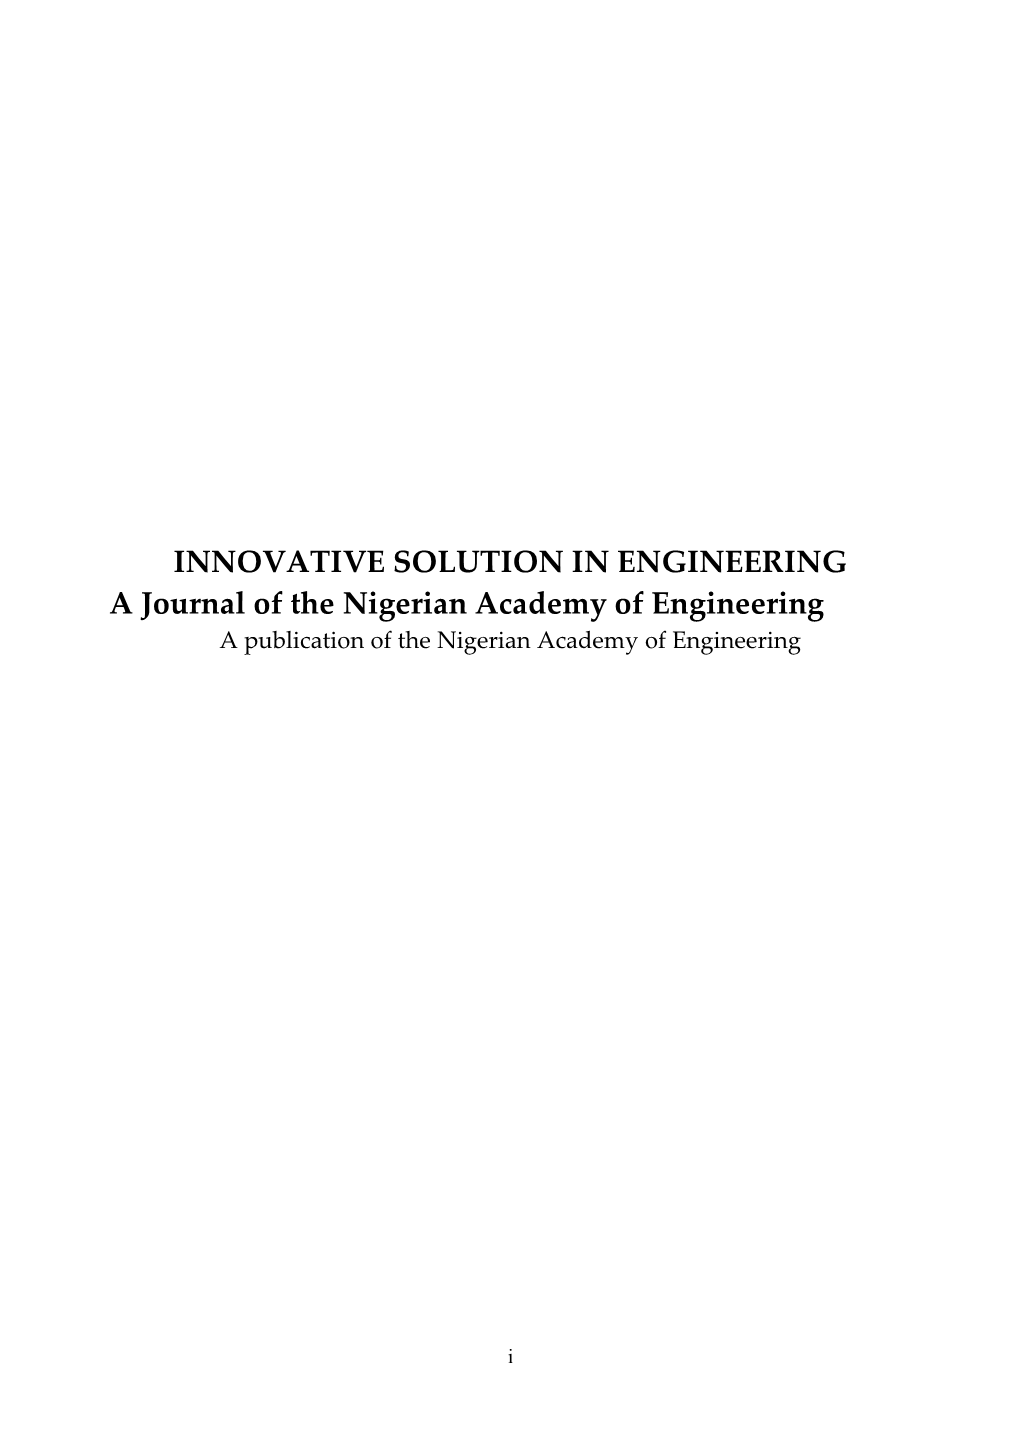 INNOVATIVE SOLUTION in ENGINEERING a Journal of the Nigerian Academy of Engineering a Publication of the Nigerian Academy of Engineering